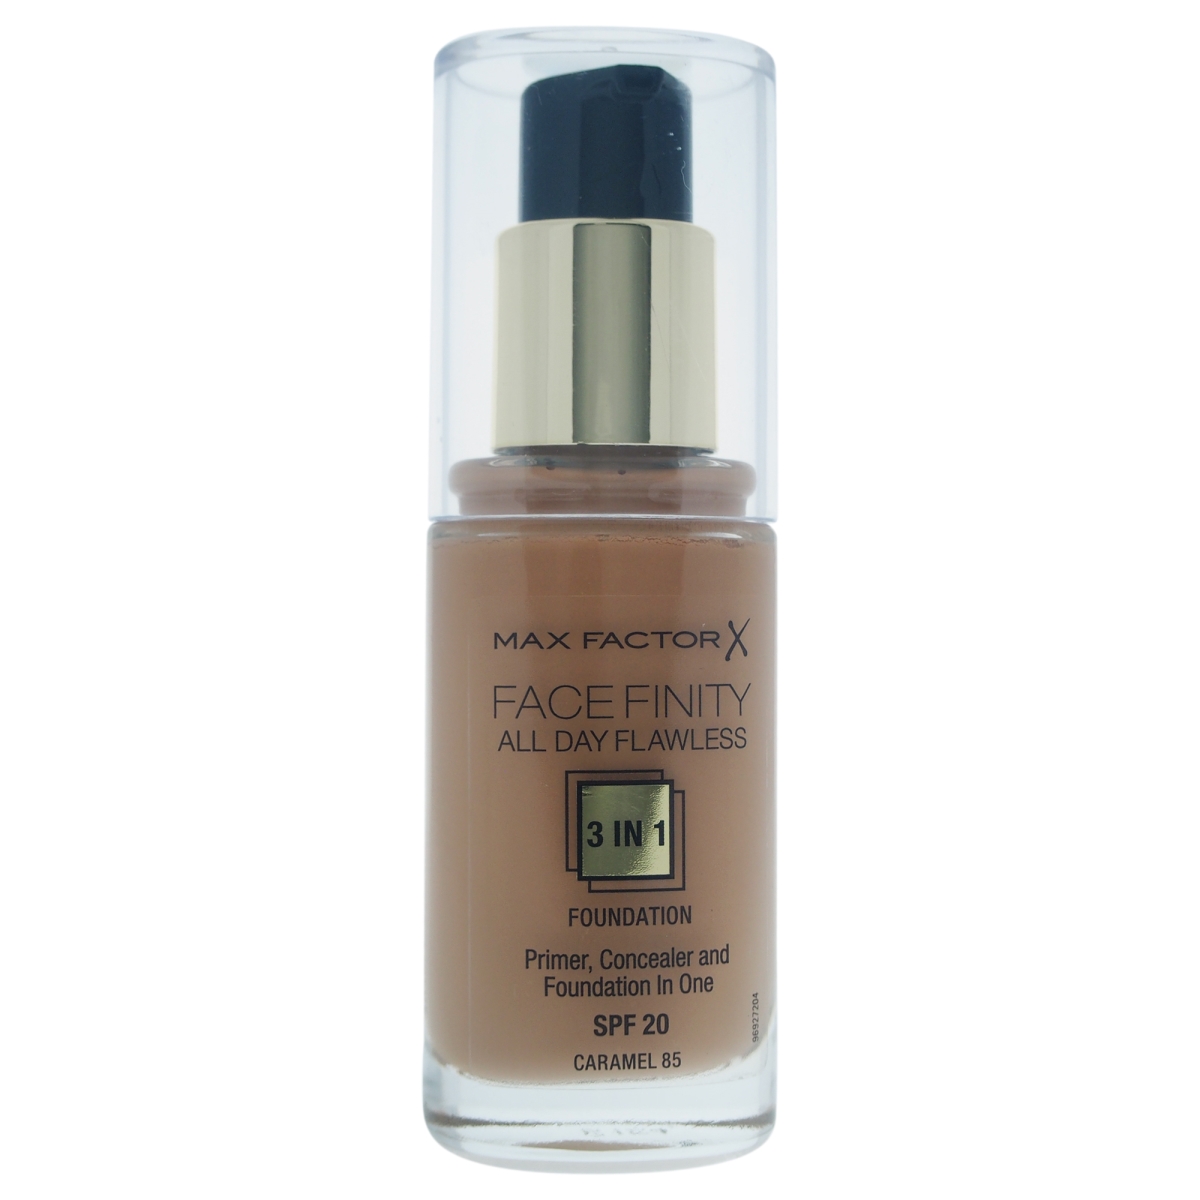 W-c-11185 30 Ml No. 85 Spf 20 Facefinity All Day Flawless 3-in-1 Foundation - Caramel For Women